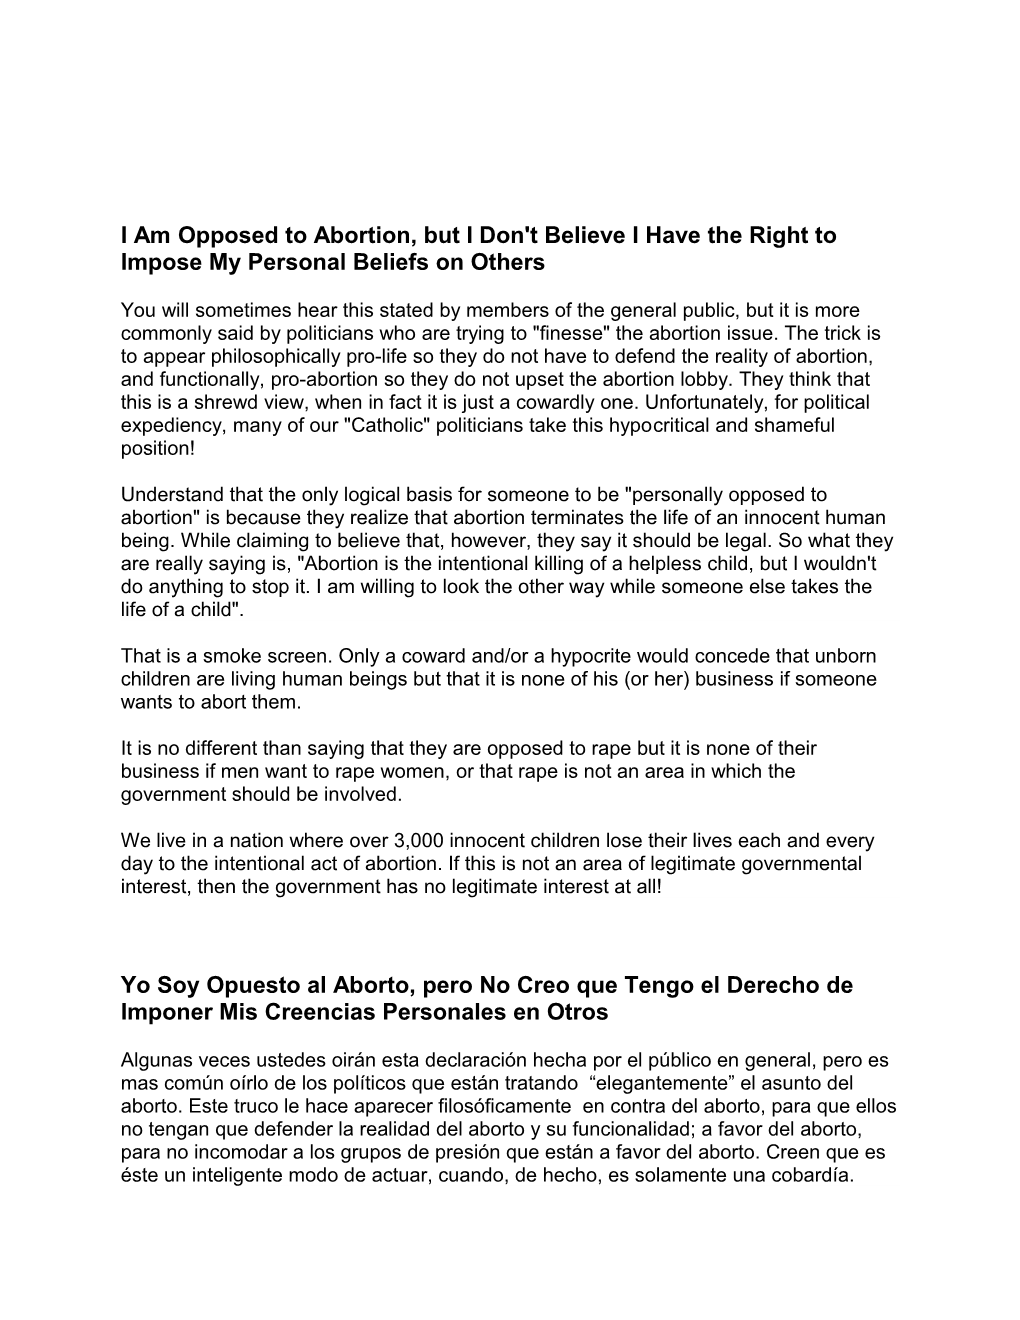 I Am Opposed to Abortion, but I Don't Believe I Have the Right to Impose My Personal Beliefs